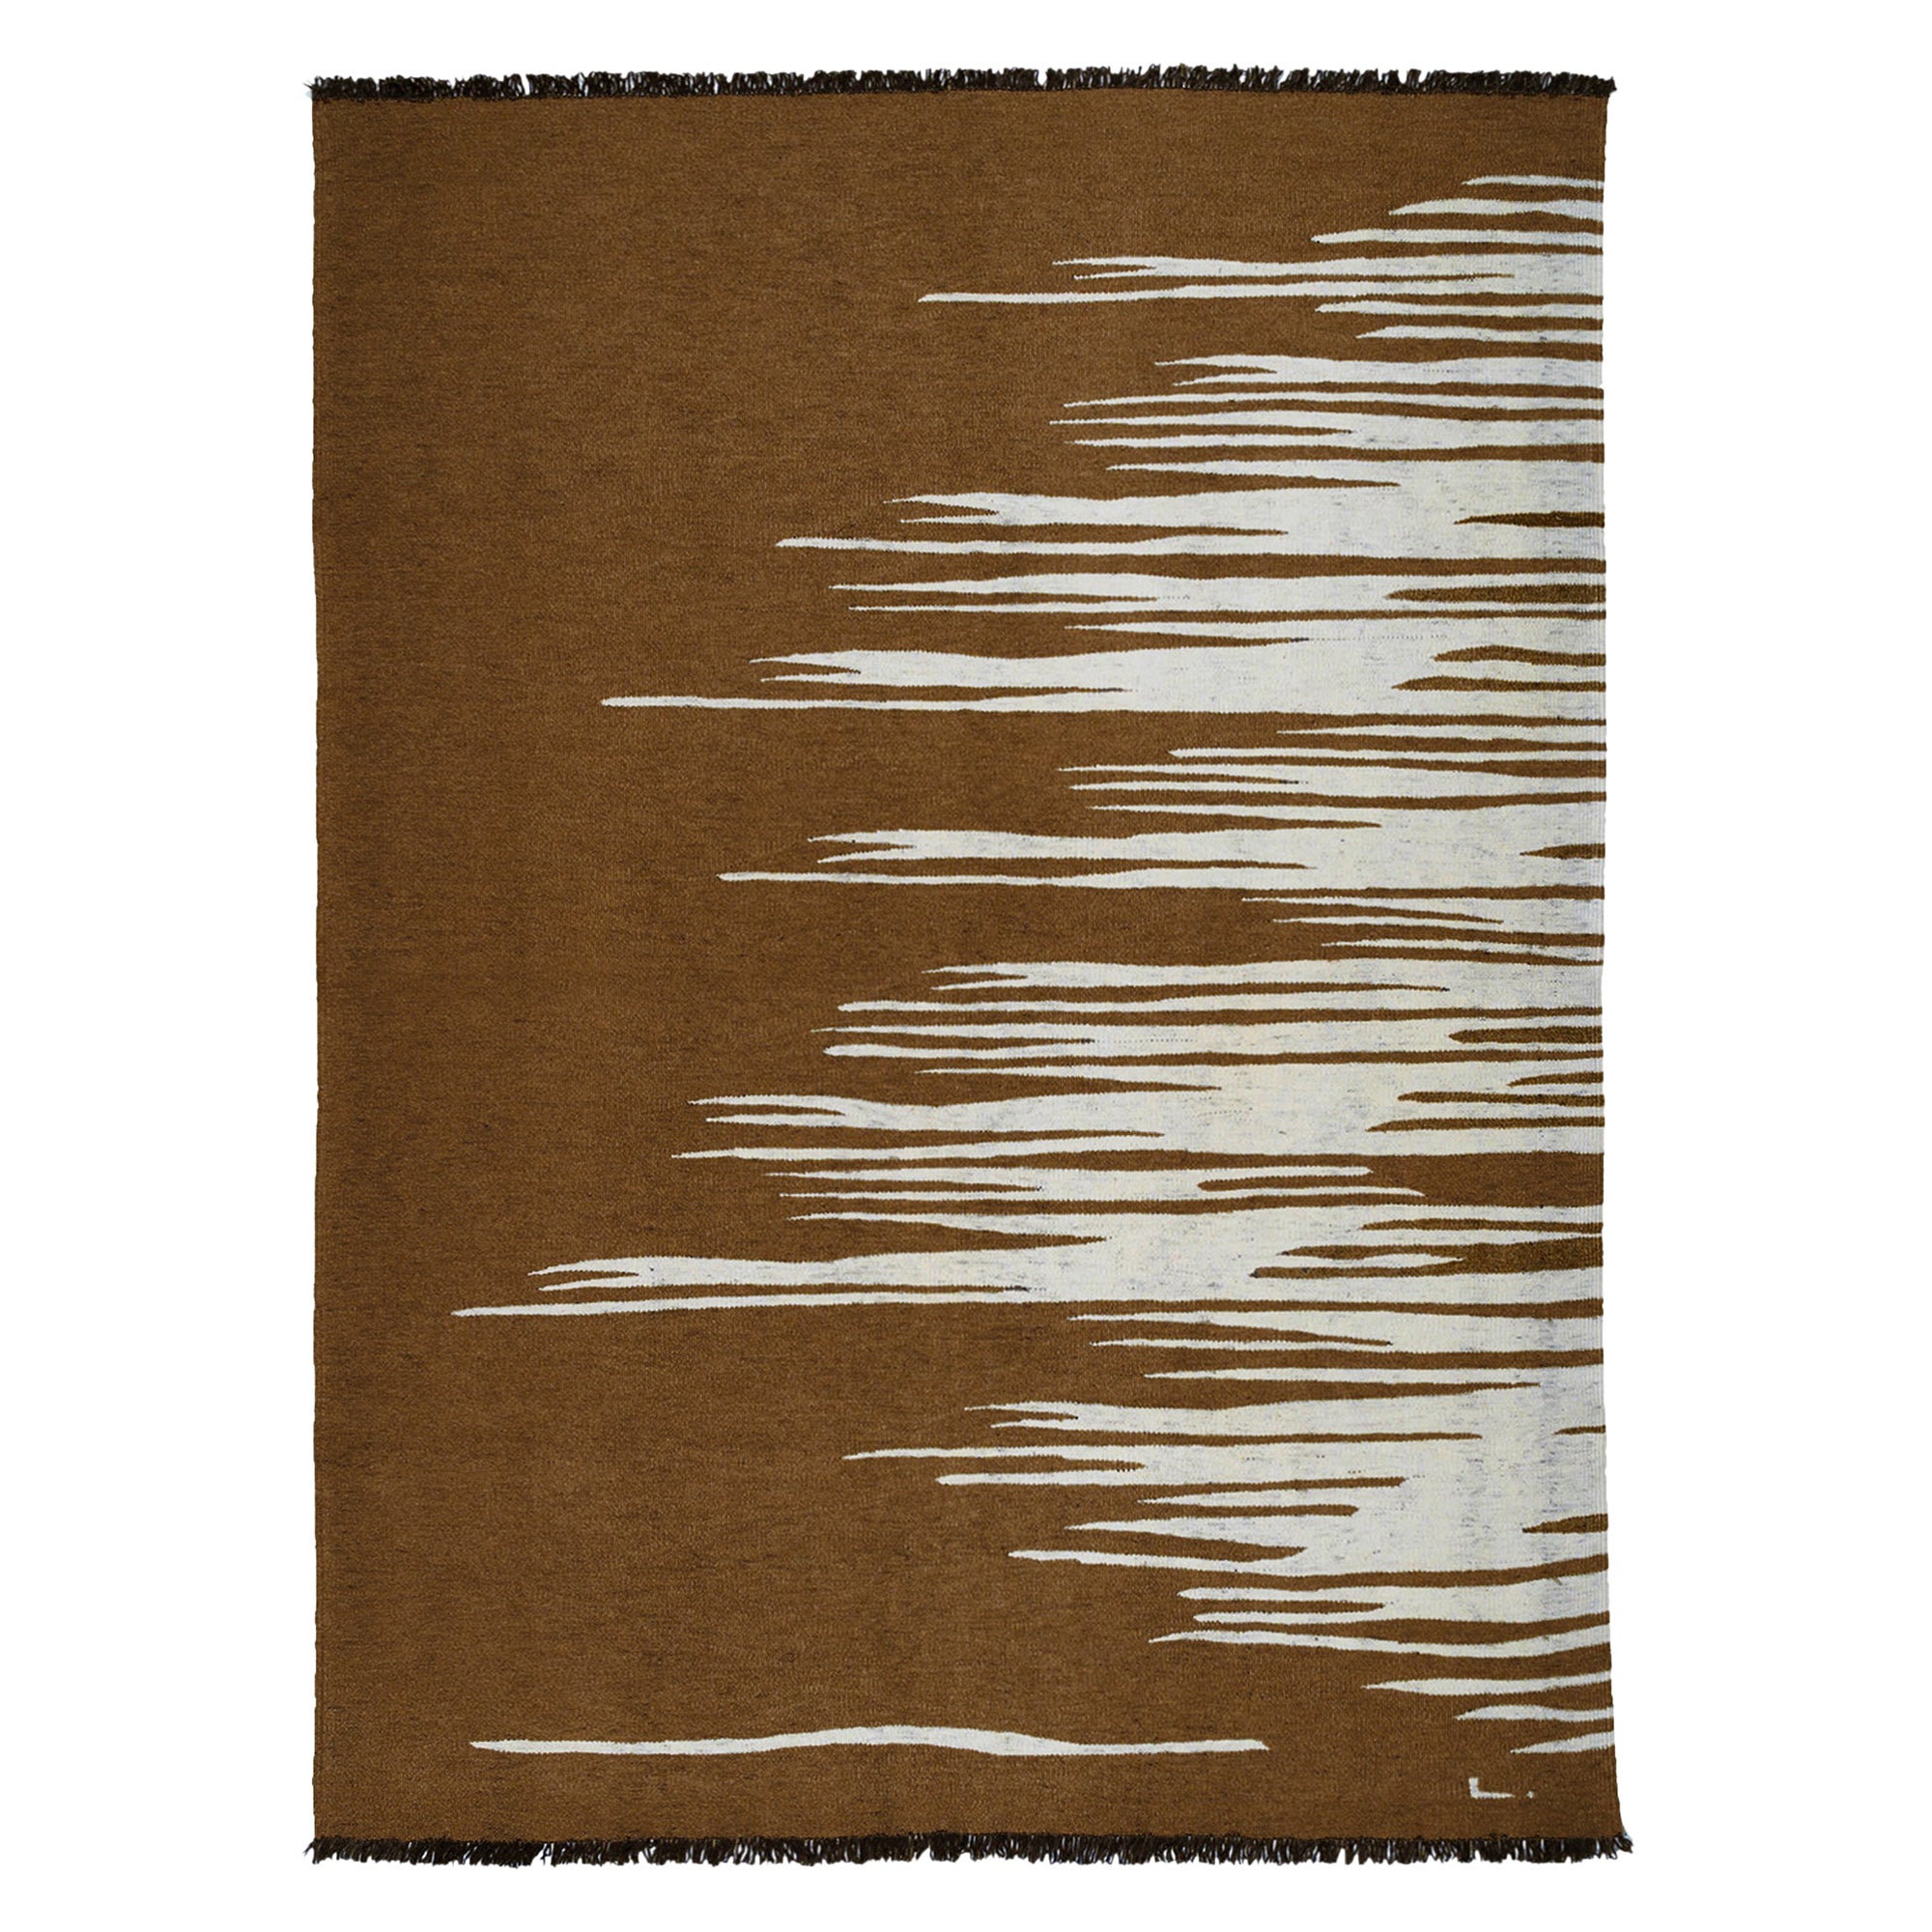 Handwoven Wool Kilim Rug Ege No 3, Contemporary, Cinnamon Brown and Dune White For Sale